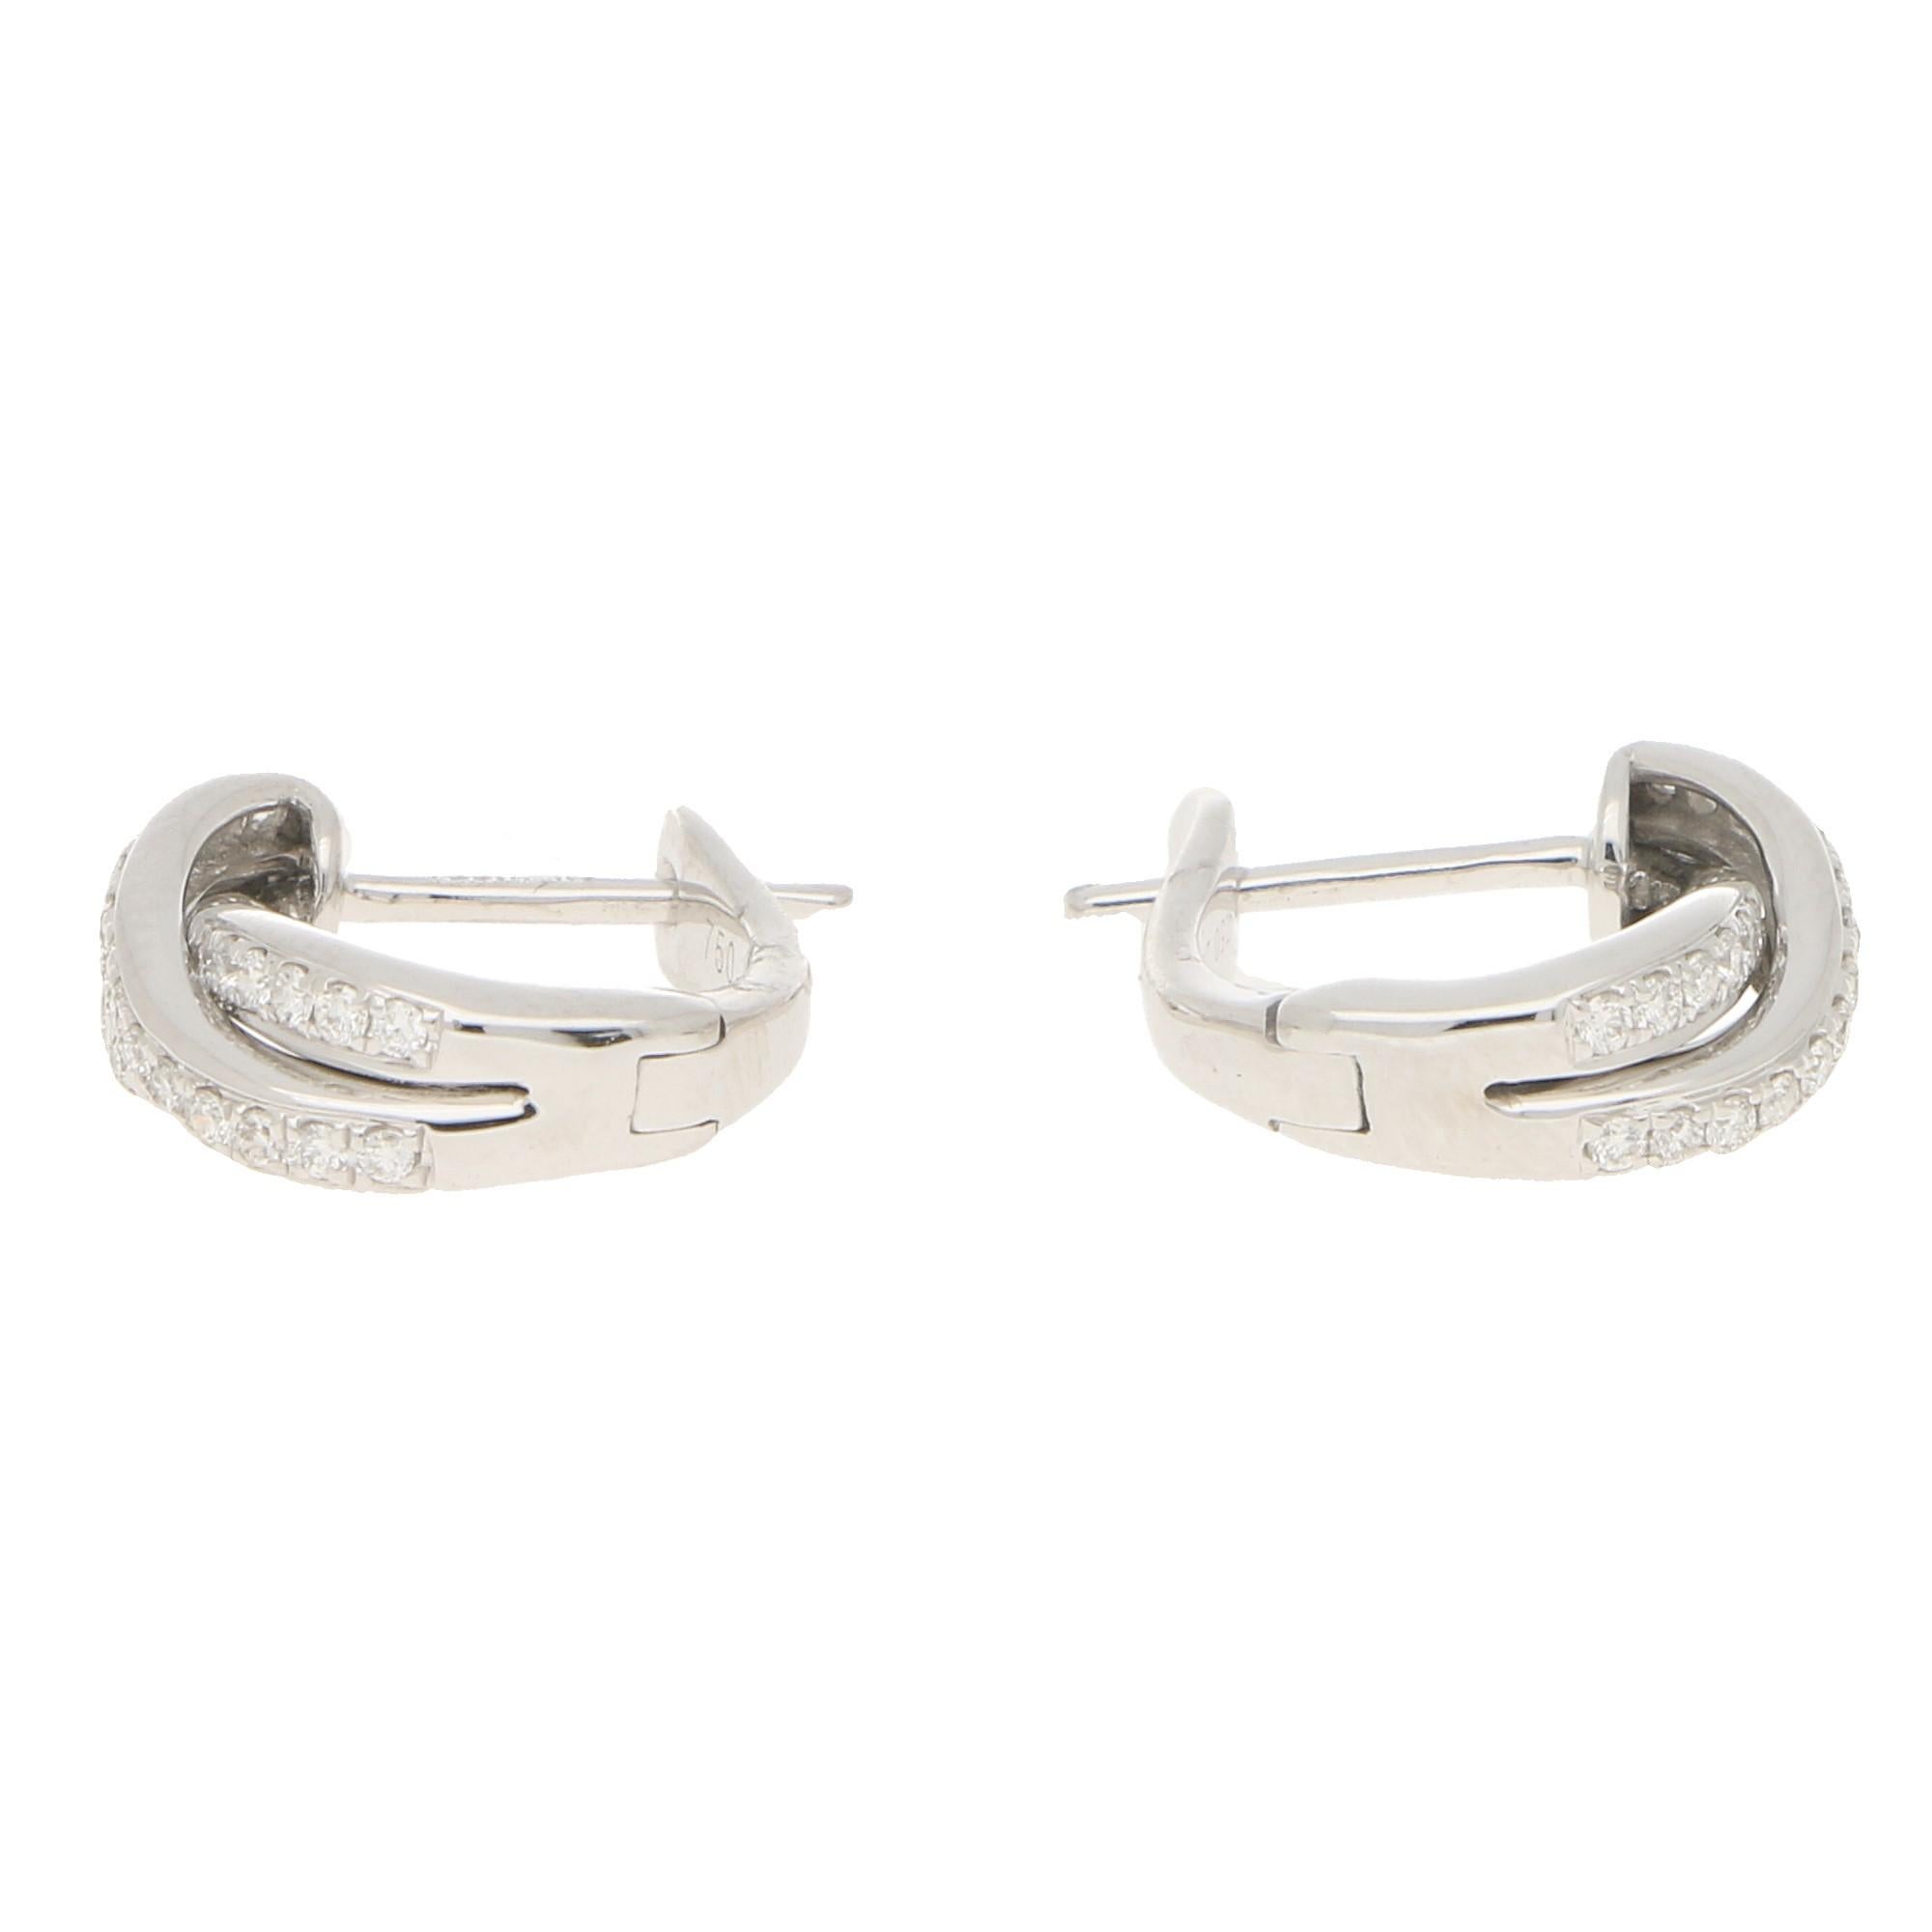 A lovely pair of diamond trinity huggy hoop earrings set in 18k white gold.

Each earring is composed of three intertwining white gold bands, all of which are pavé set with round brilliant cut diamonds. Each hoop is fastened with a hinged post clip